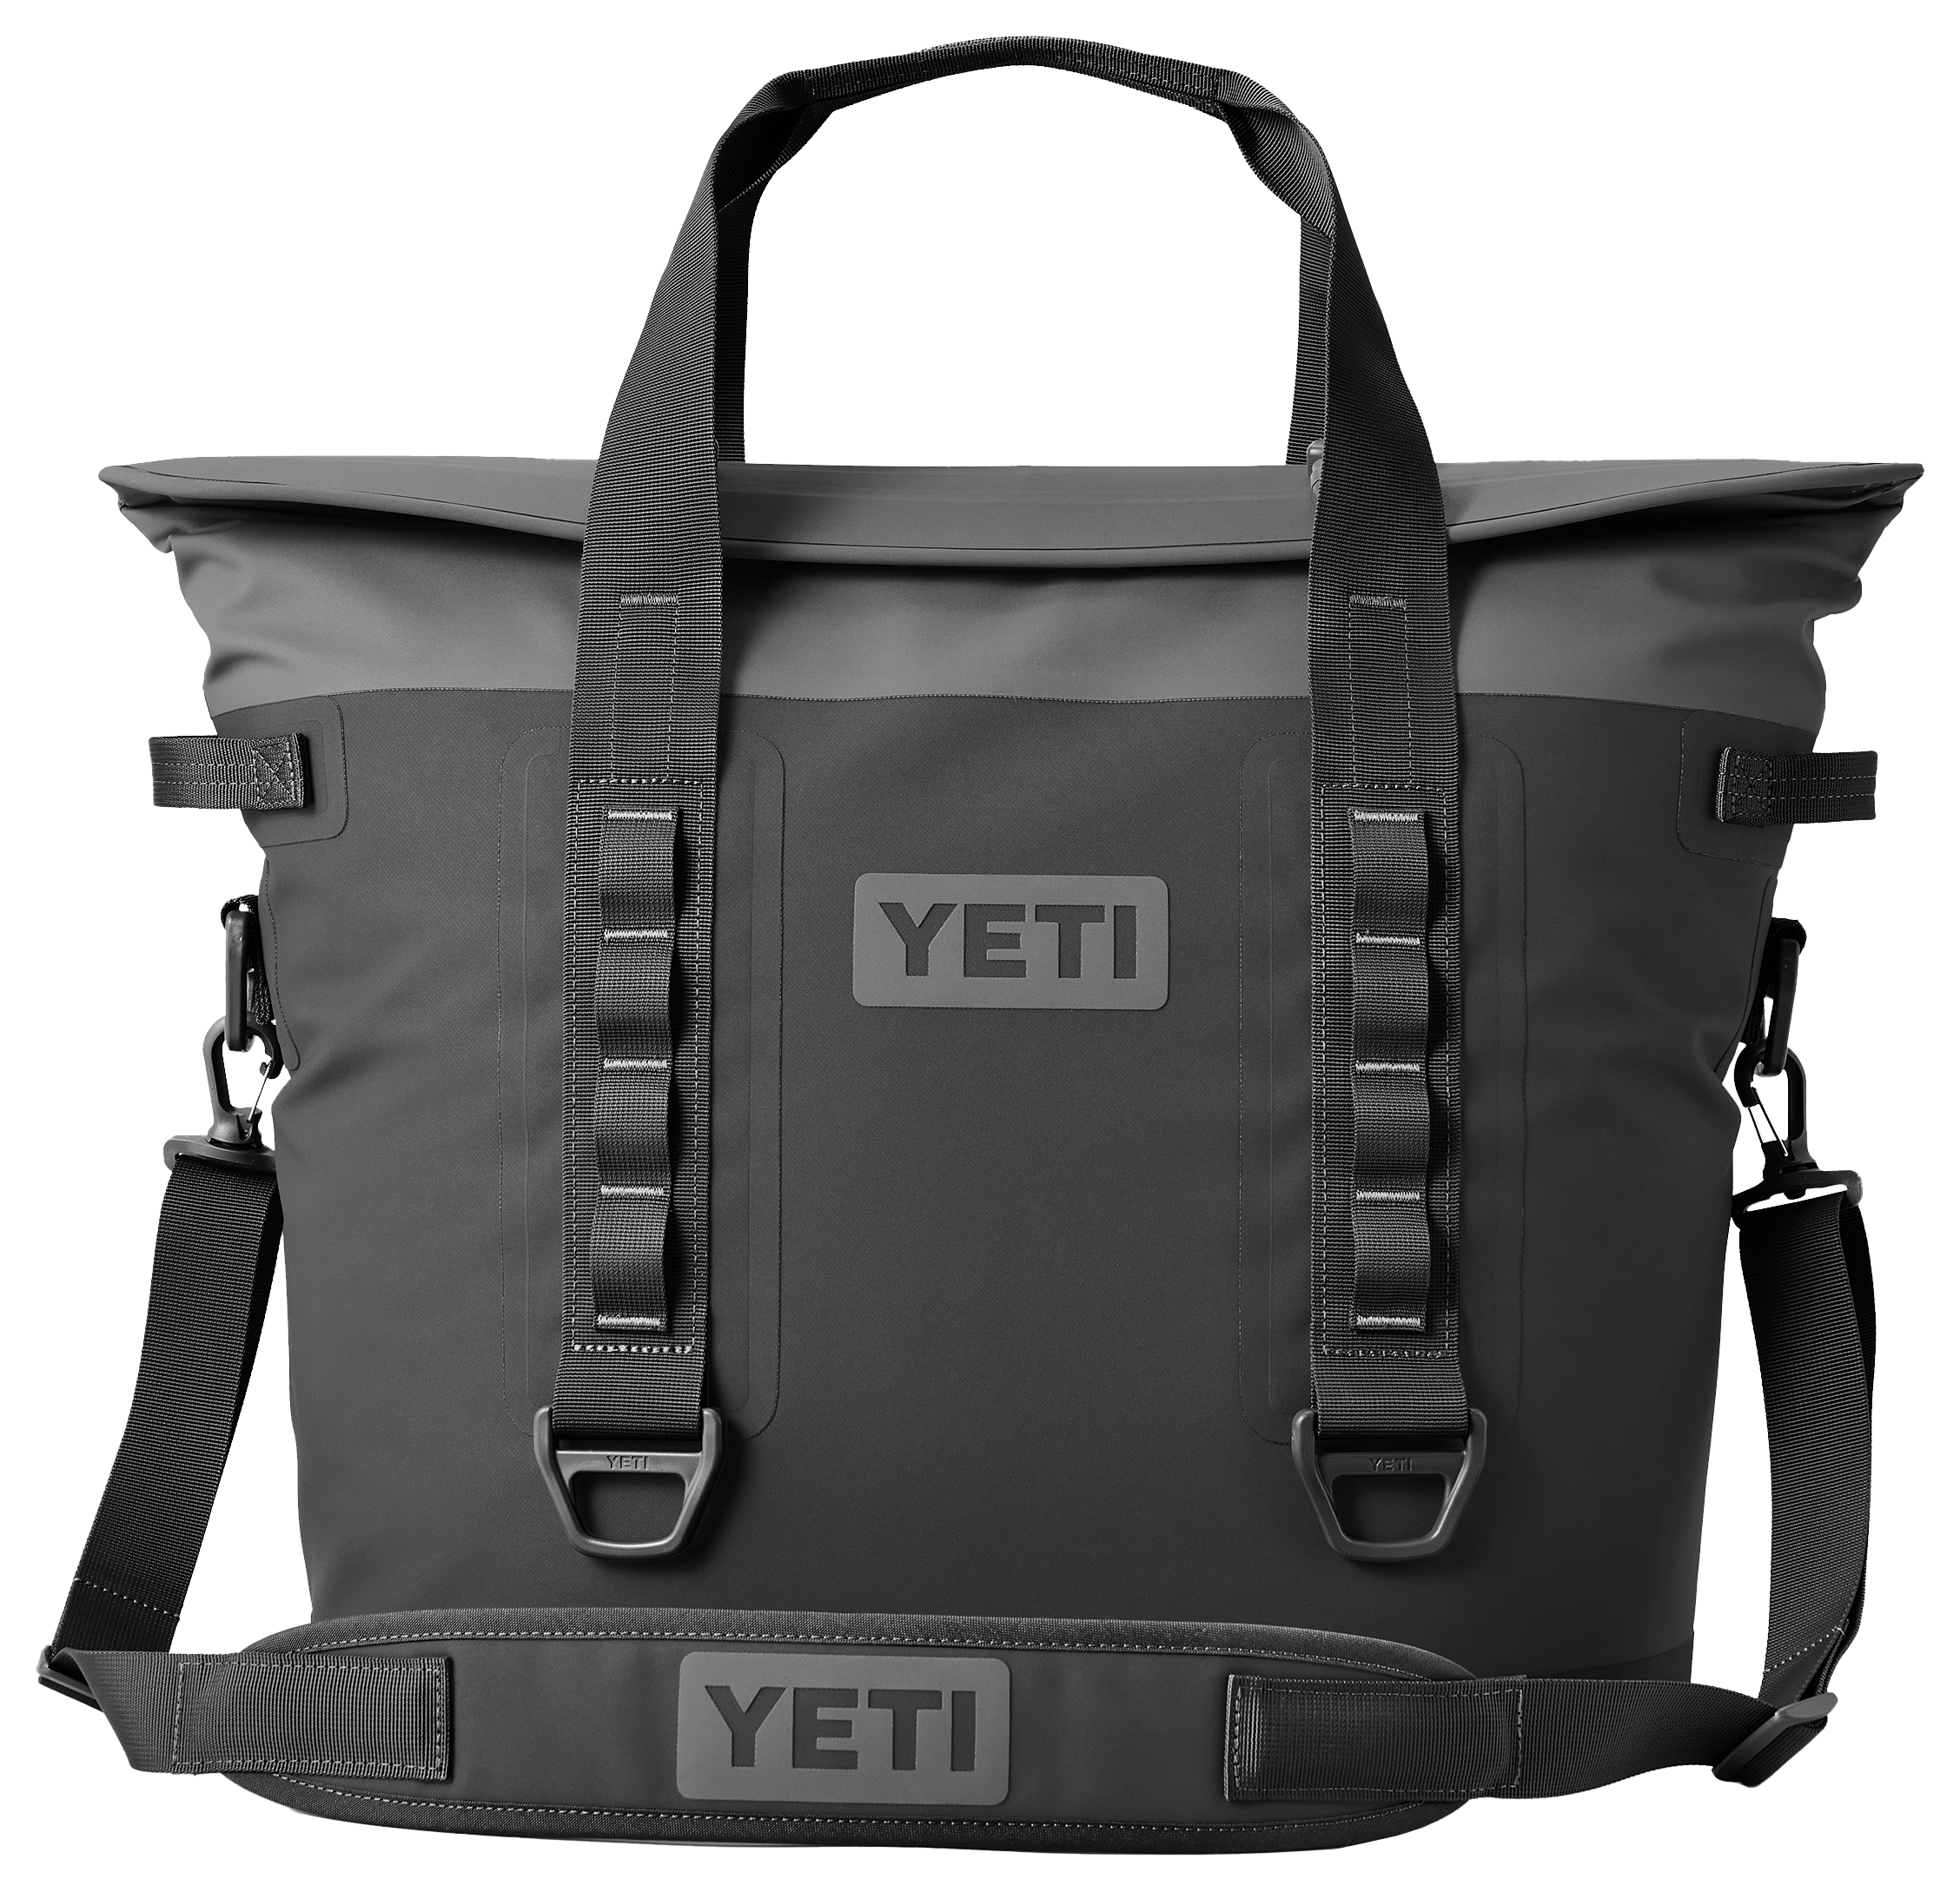 Dog Bag Holder Attachment for Soft Yeti Coolers & Bags With MOLLE or PALS  Straps Systems 